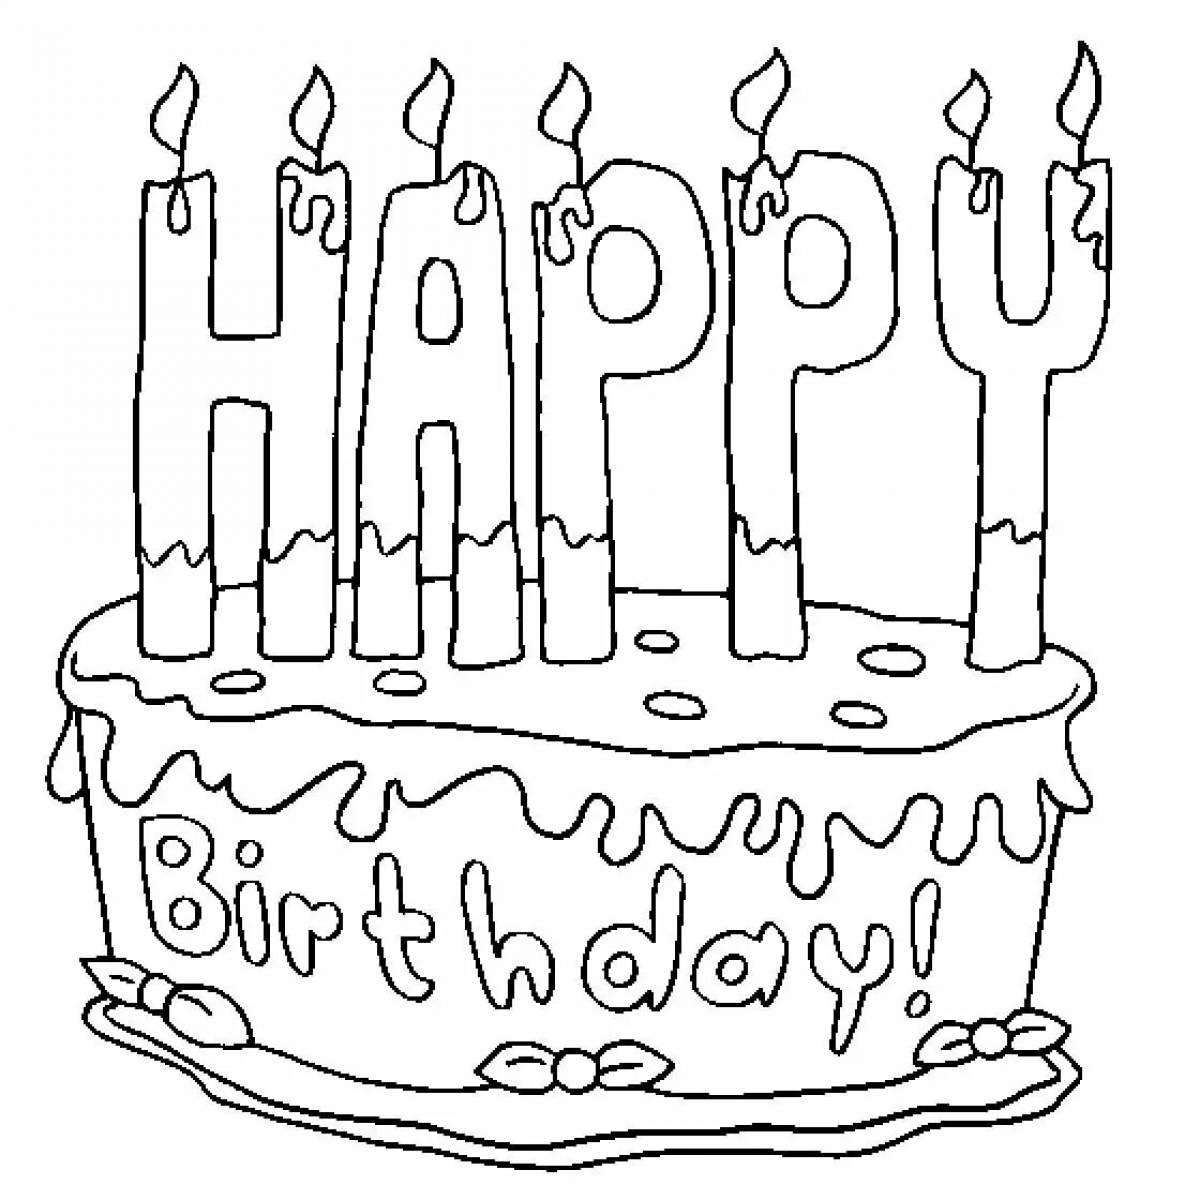 Coloring page chipper birthday girl 10 years old